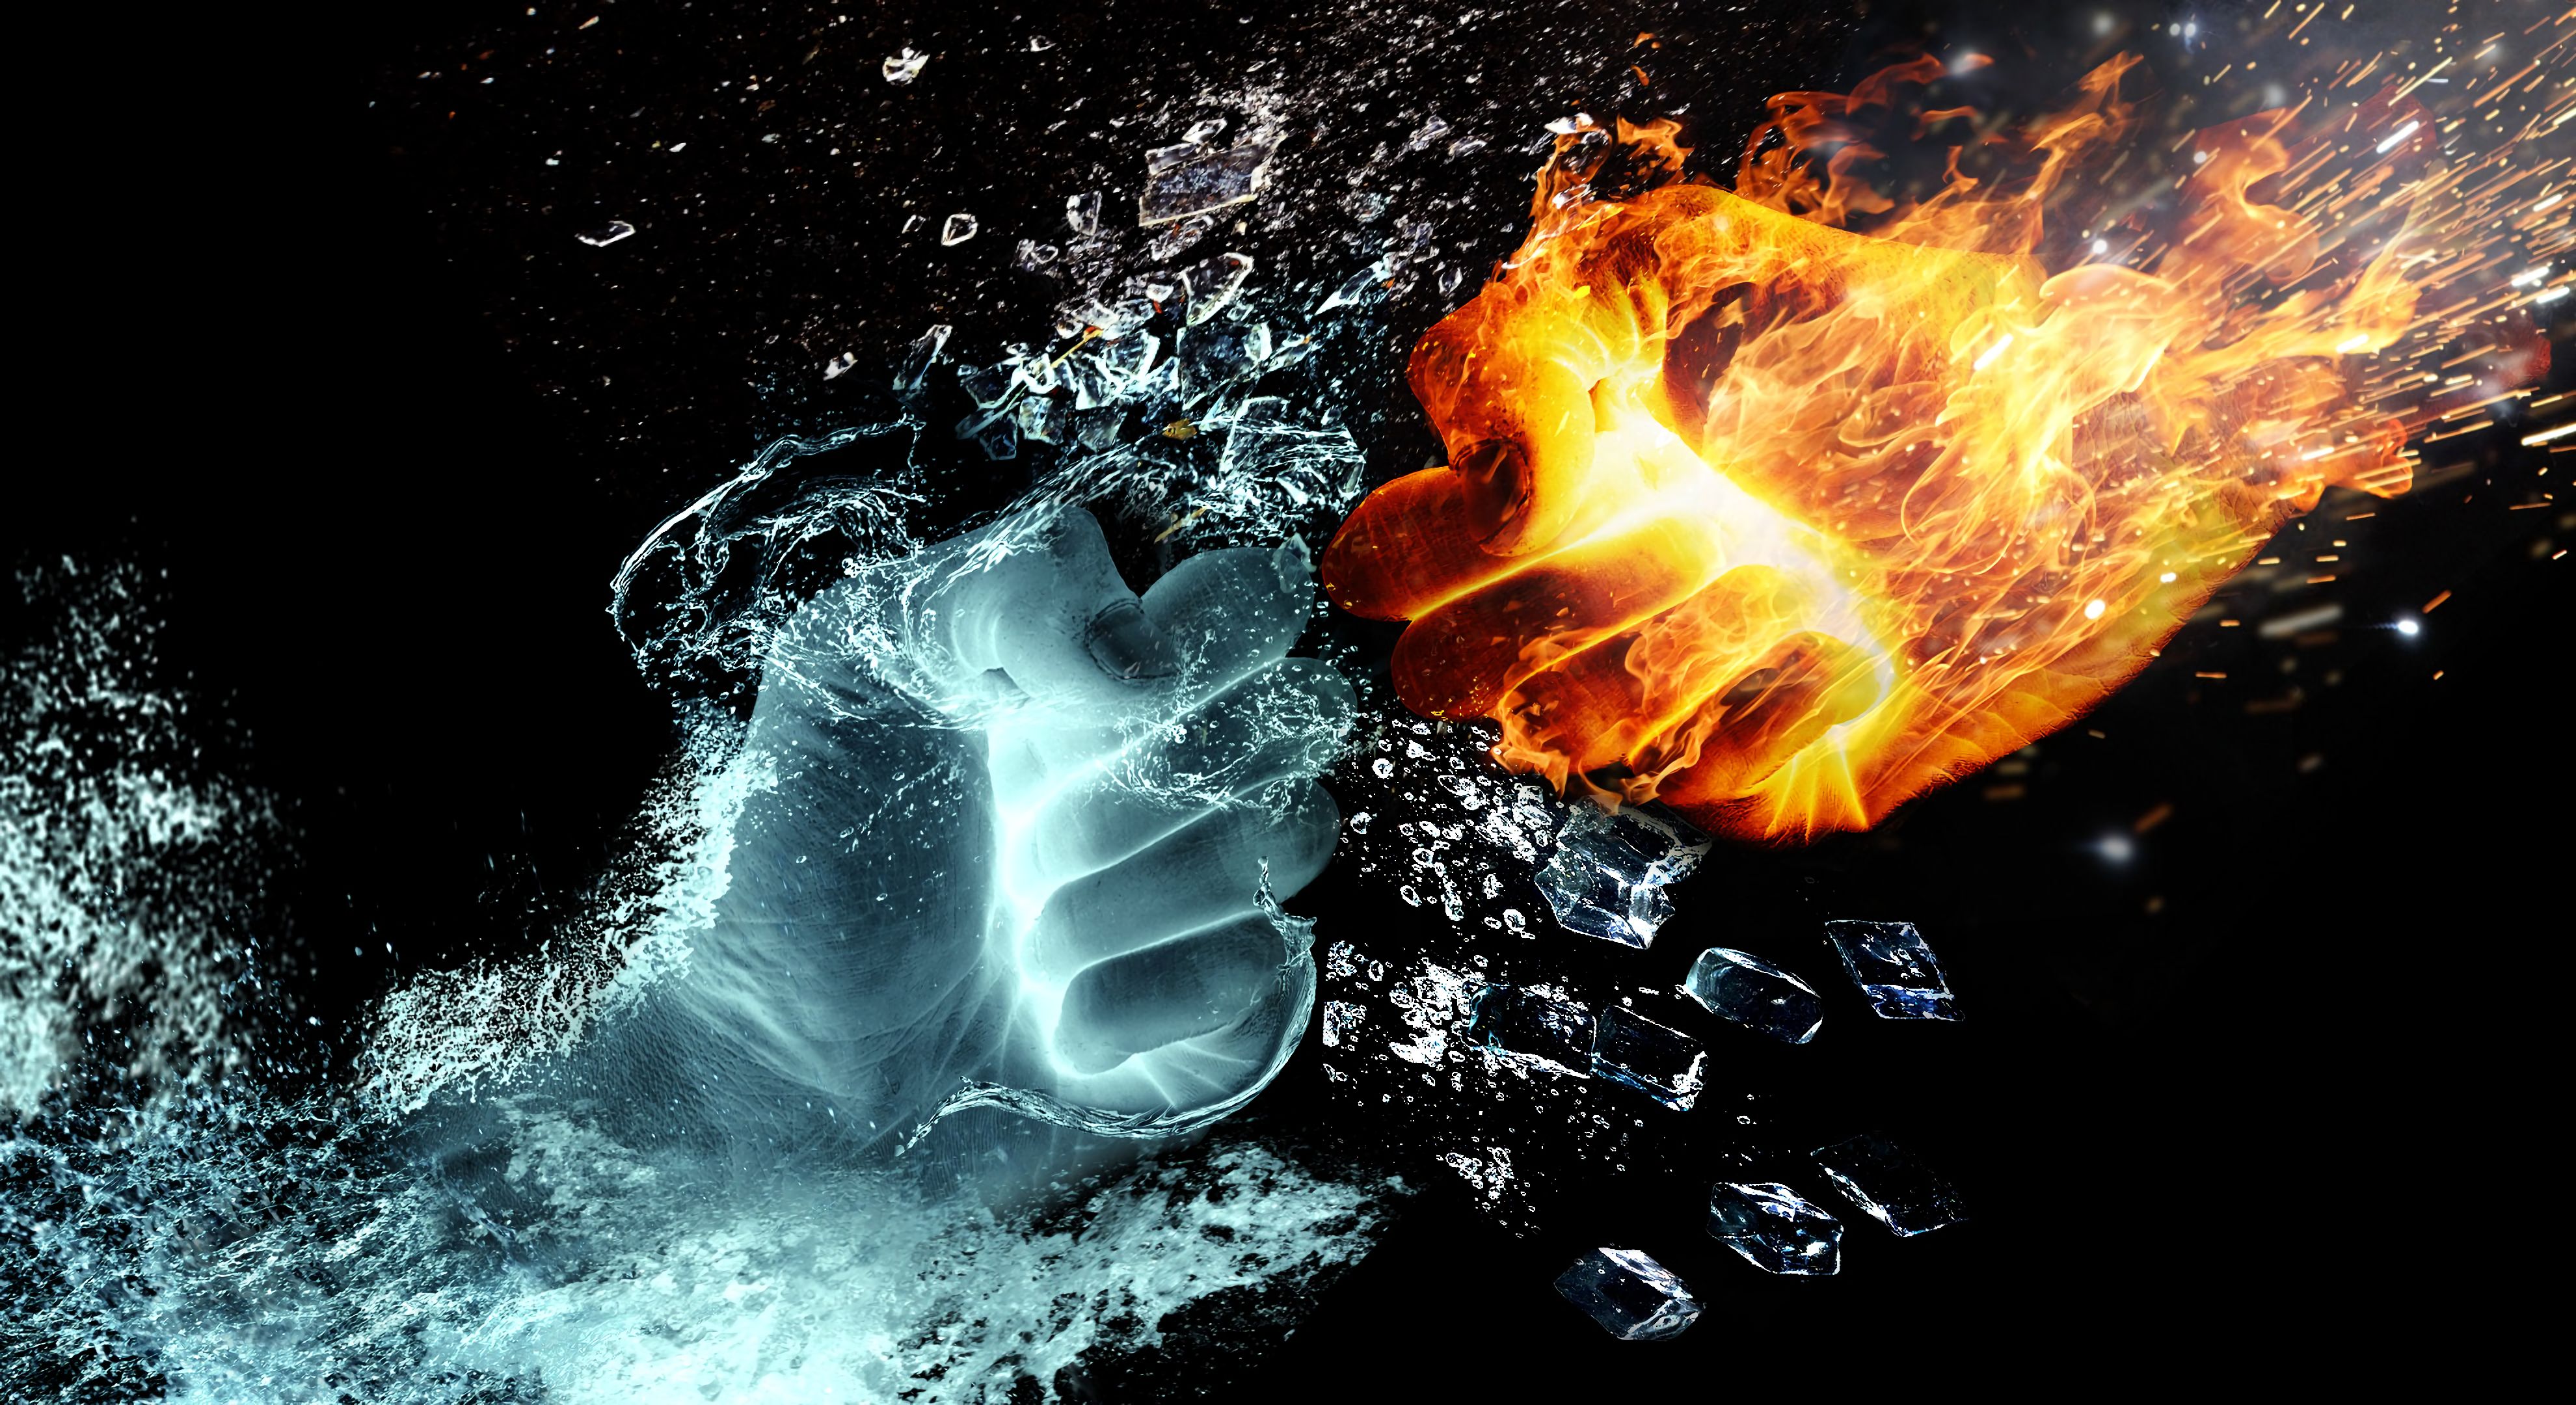 hands, fire, water, miscellanea, miscellaneous, spray, shards, smithereens 2160p